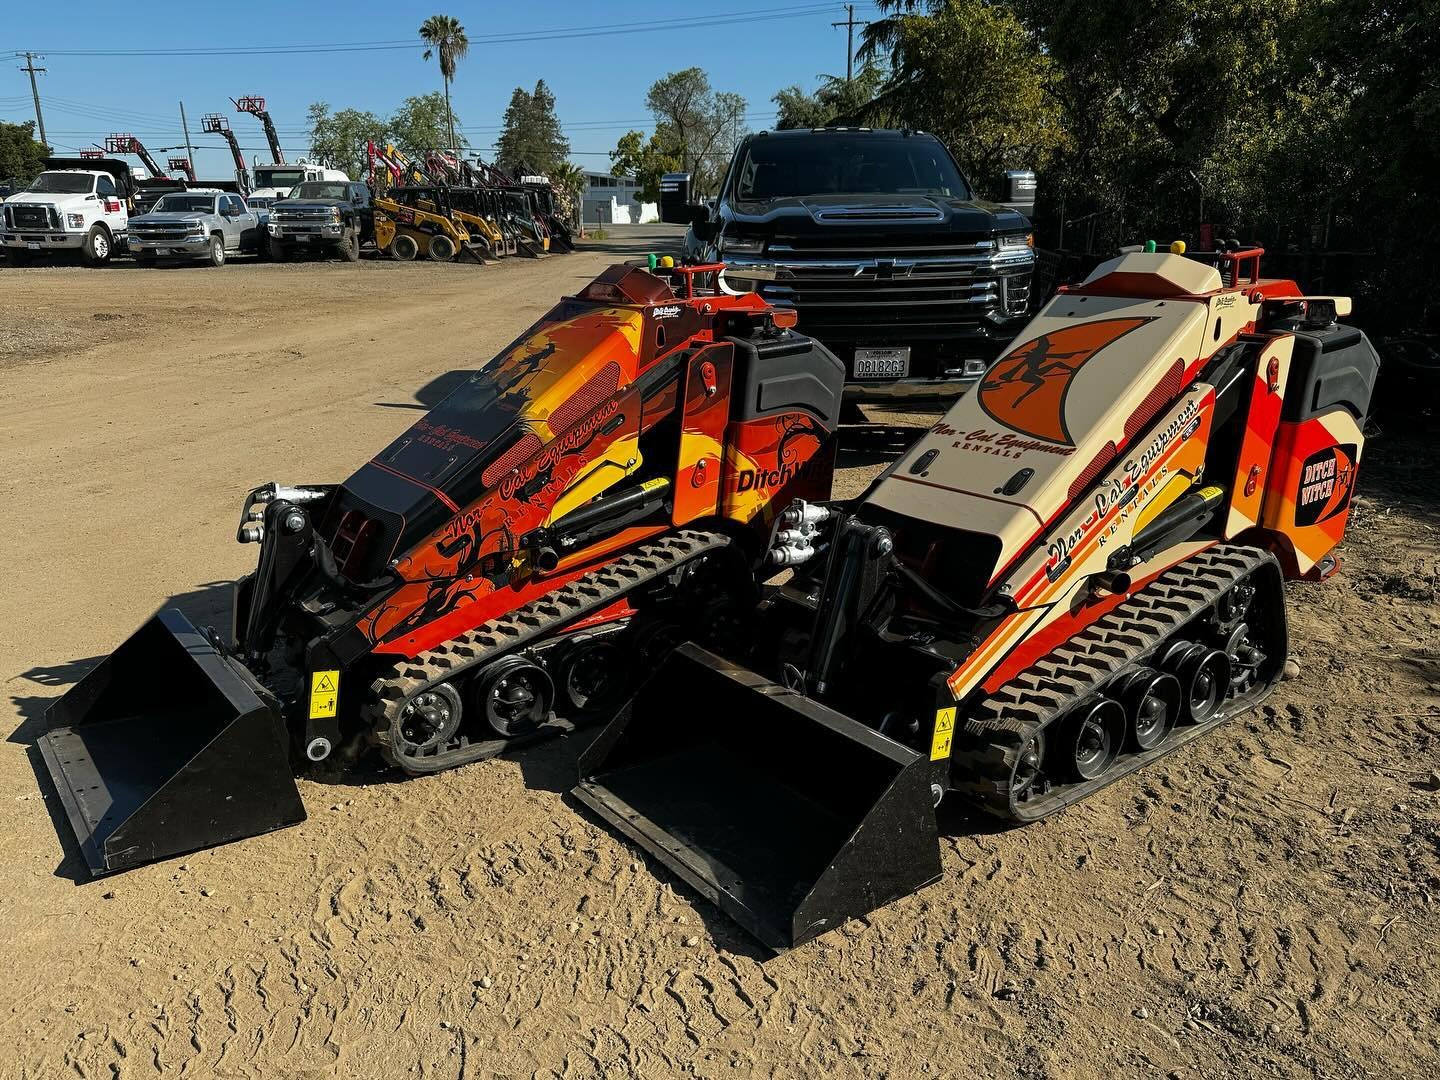 Our new twins are here! Thx @dirtygraphixinc for tricking out our new Ditch Witch SK900&rsquo;s!😎👍#norcalequipmentrentals #norcal #witch #retro #80 #80s #halloween #spooky #landscape #landscapephotography #landscape_lovers #backyard #backyardgarden